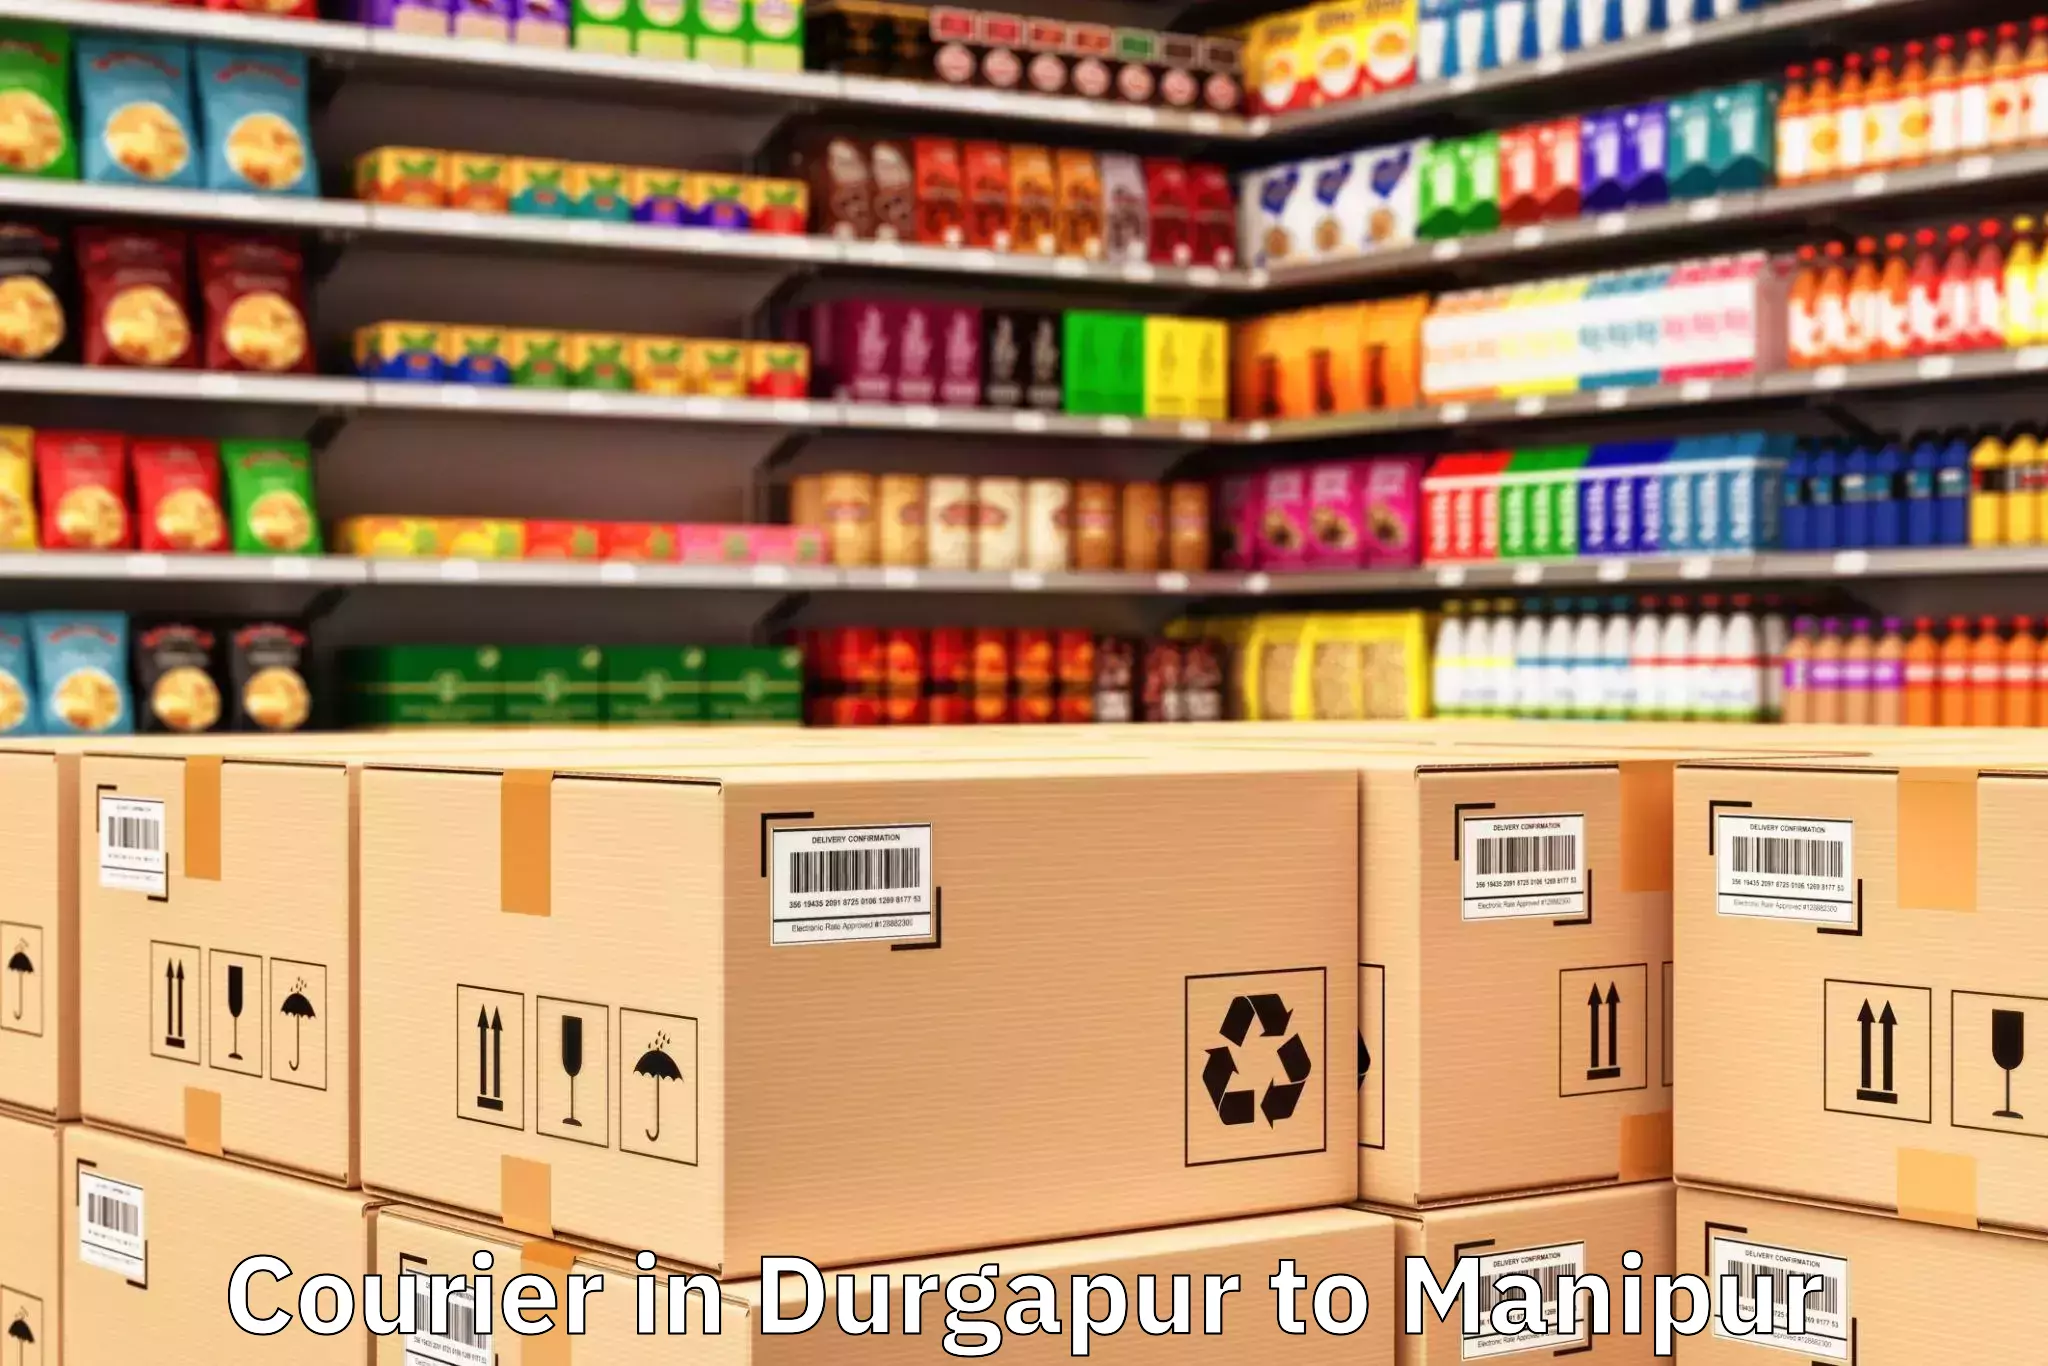 Quality Durgapur to Ukhrul South Courier